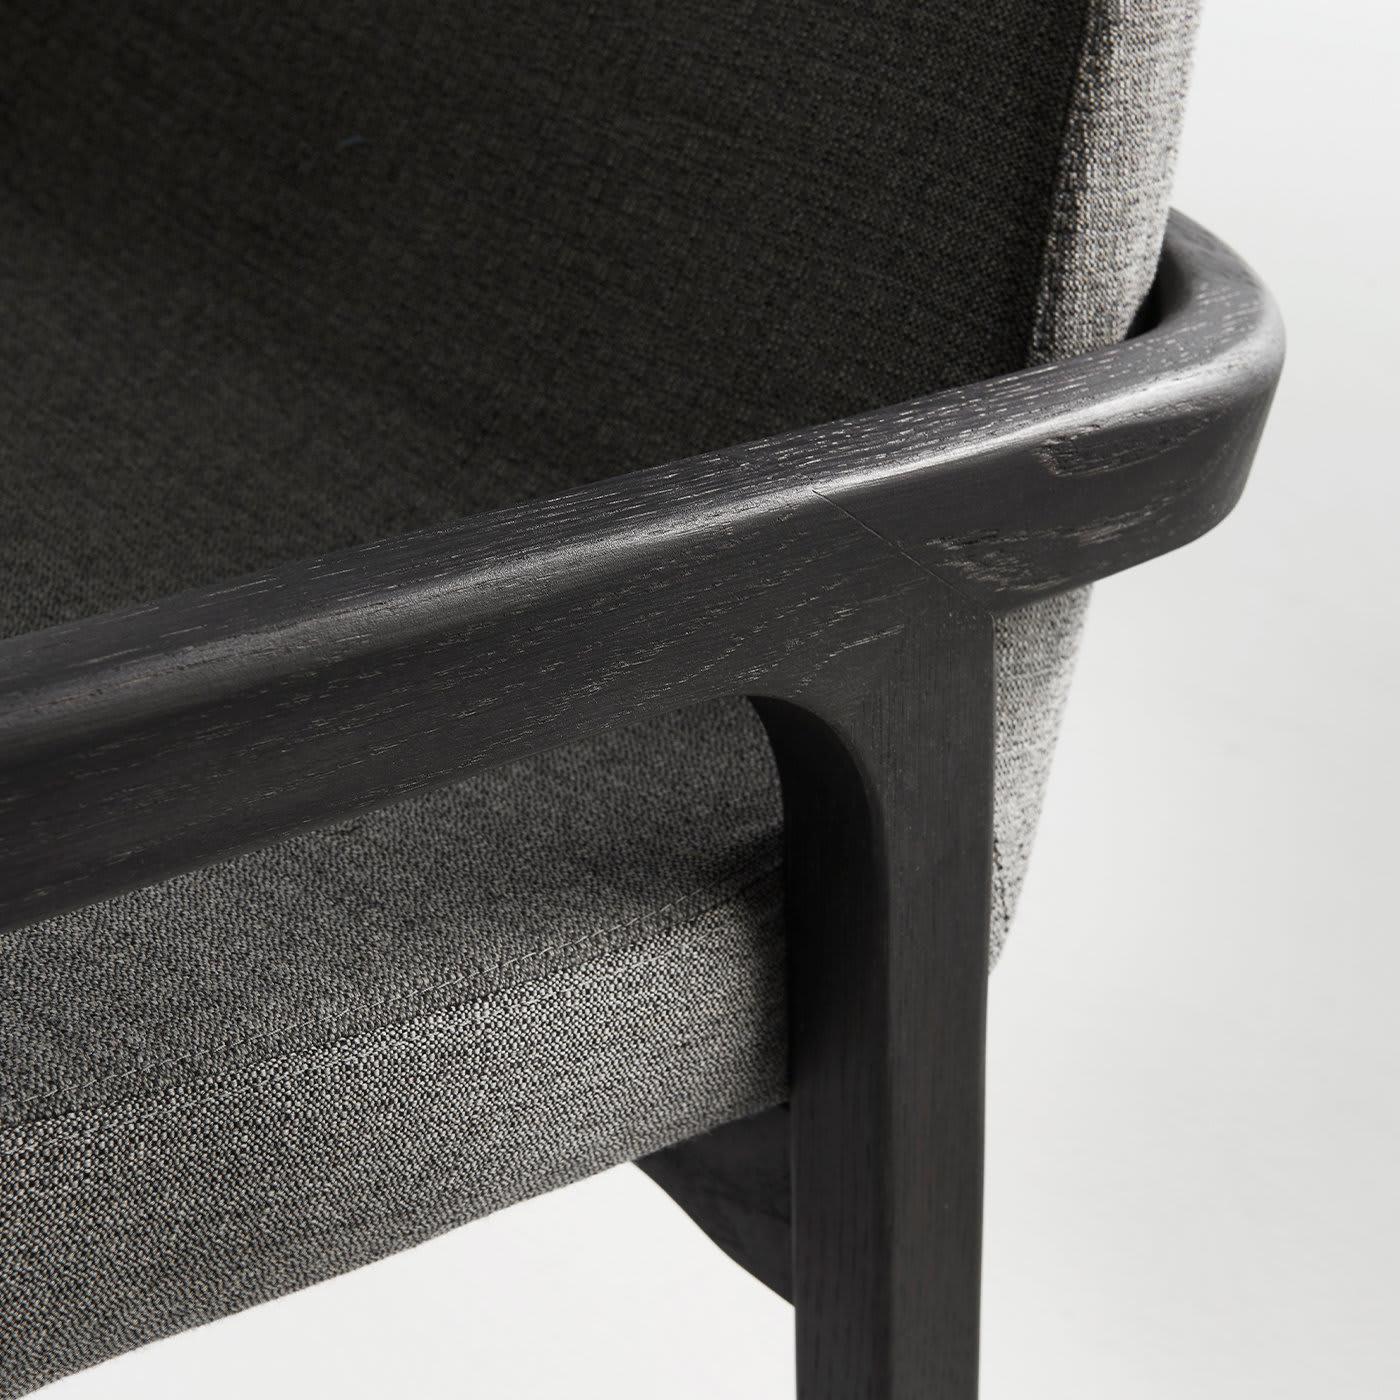 Decanter Lazy Black Ash Armchair with Anthracite Upholstery - Passoni Design